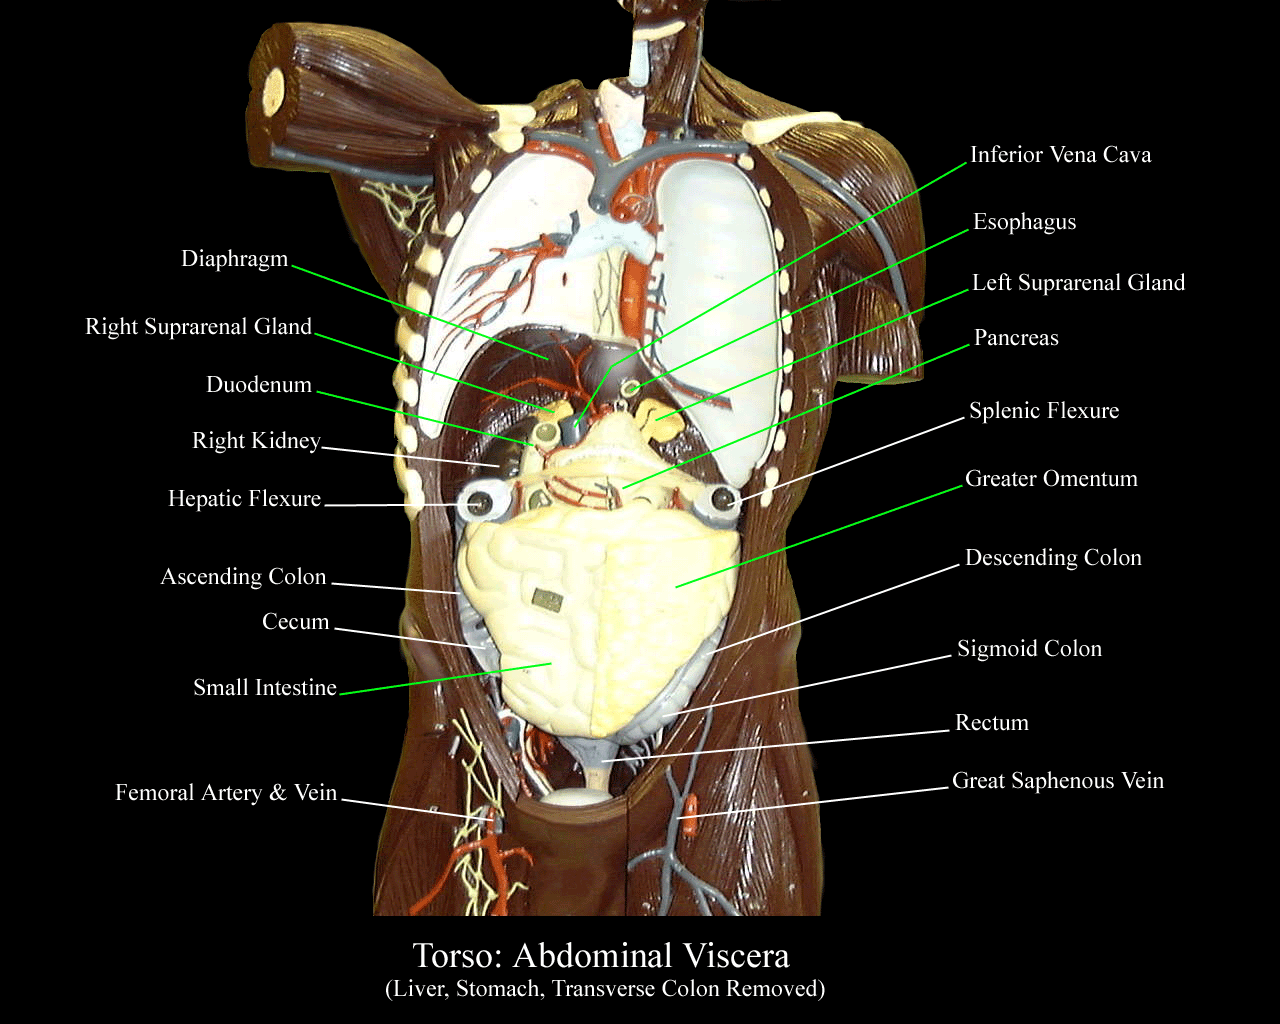 a labeled picture of the viscera in a torso model with the lungs and liver stomach and transverse colon removed